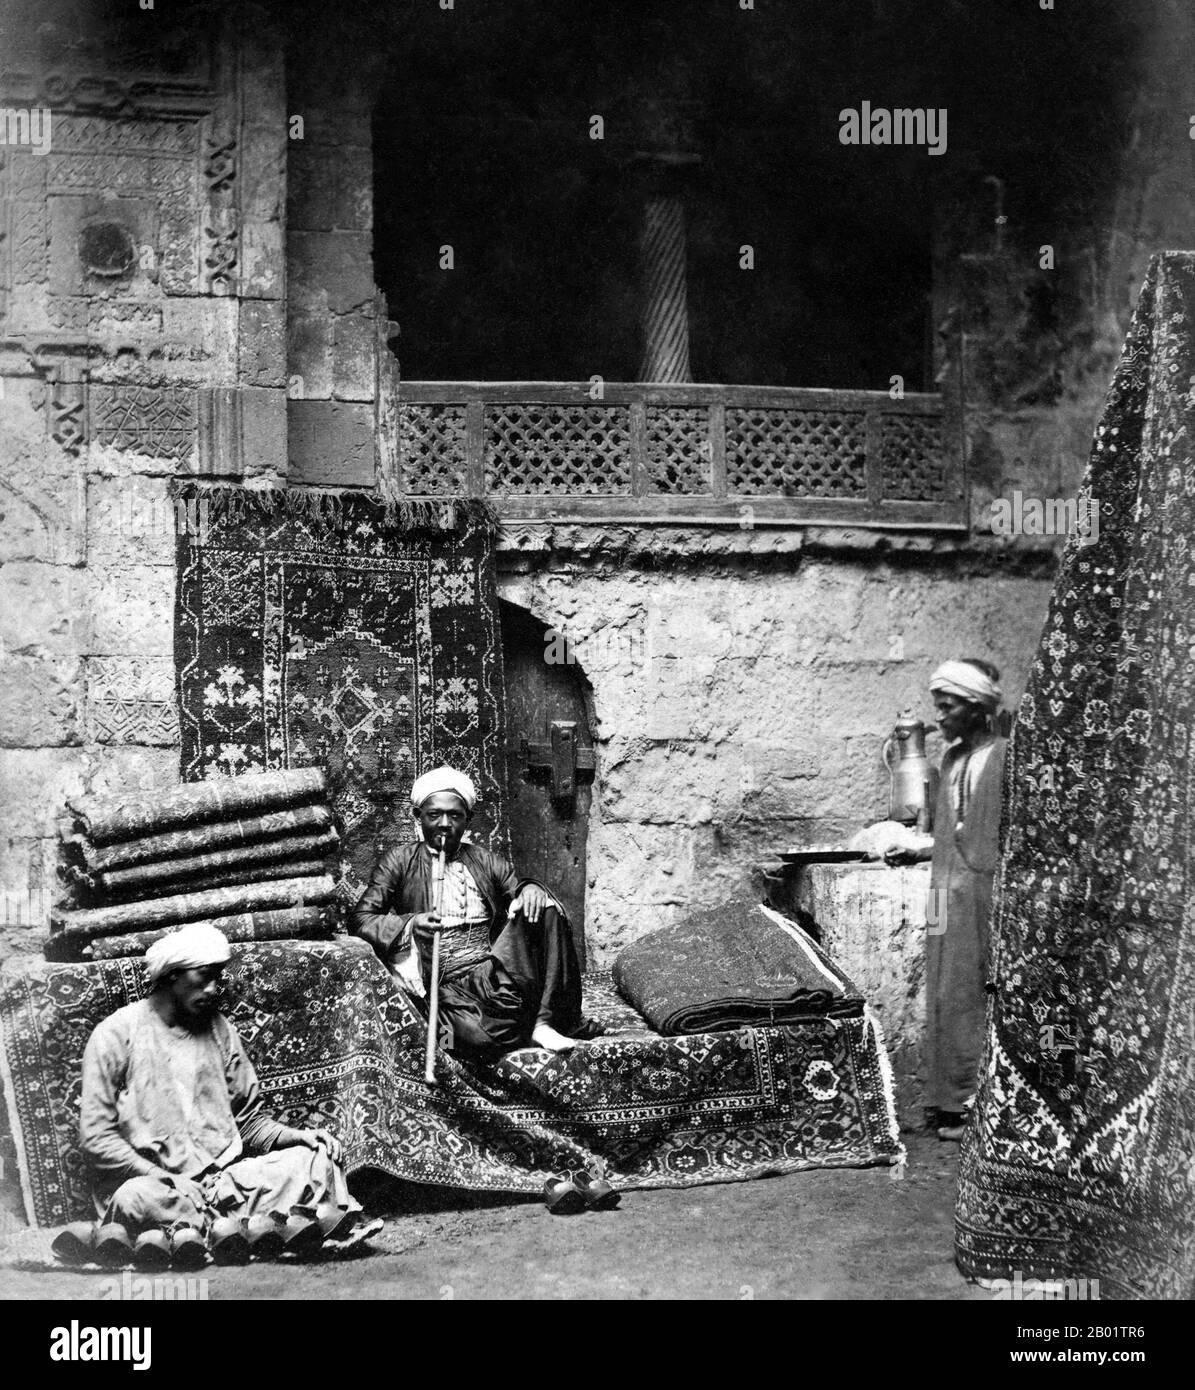 Egypt: Carpet sellers in Cairo. Photo by the Adelphoi Zangaki/Zangaki Brothers, late 19th century.  An authentic oriental rug is a handmade carpet that is either knotted with pile or woven without pile.  By definition - Oriental rugs are rugs that come from the orient. The simple definition of the term would be - rugs that come from (were made in) an Asian Country such as: China and Vietnam in the east to Turkey, Maghreb countries, Cyprus and Iran in the west and the Caucasus in the north to India in the south. Stock Photo